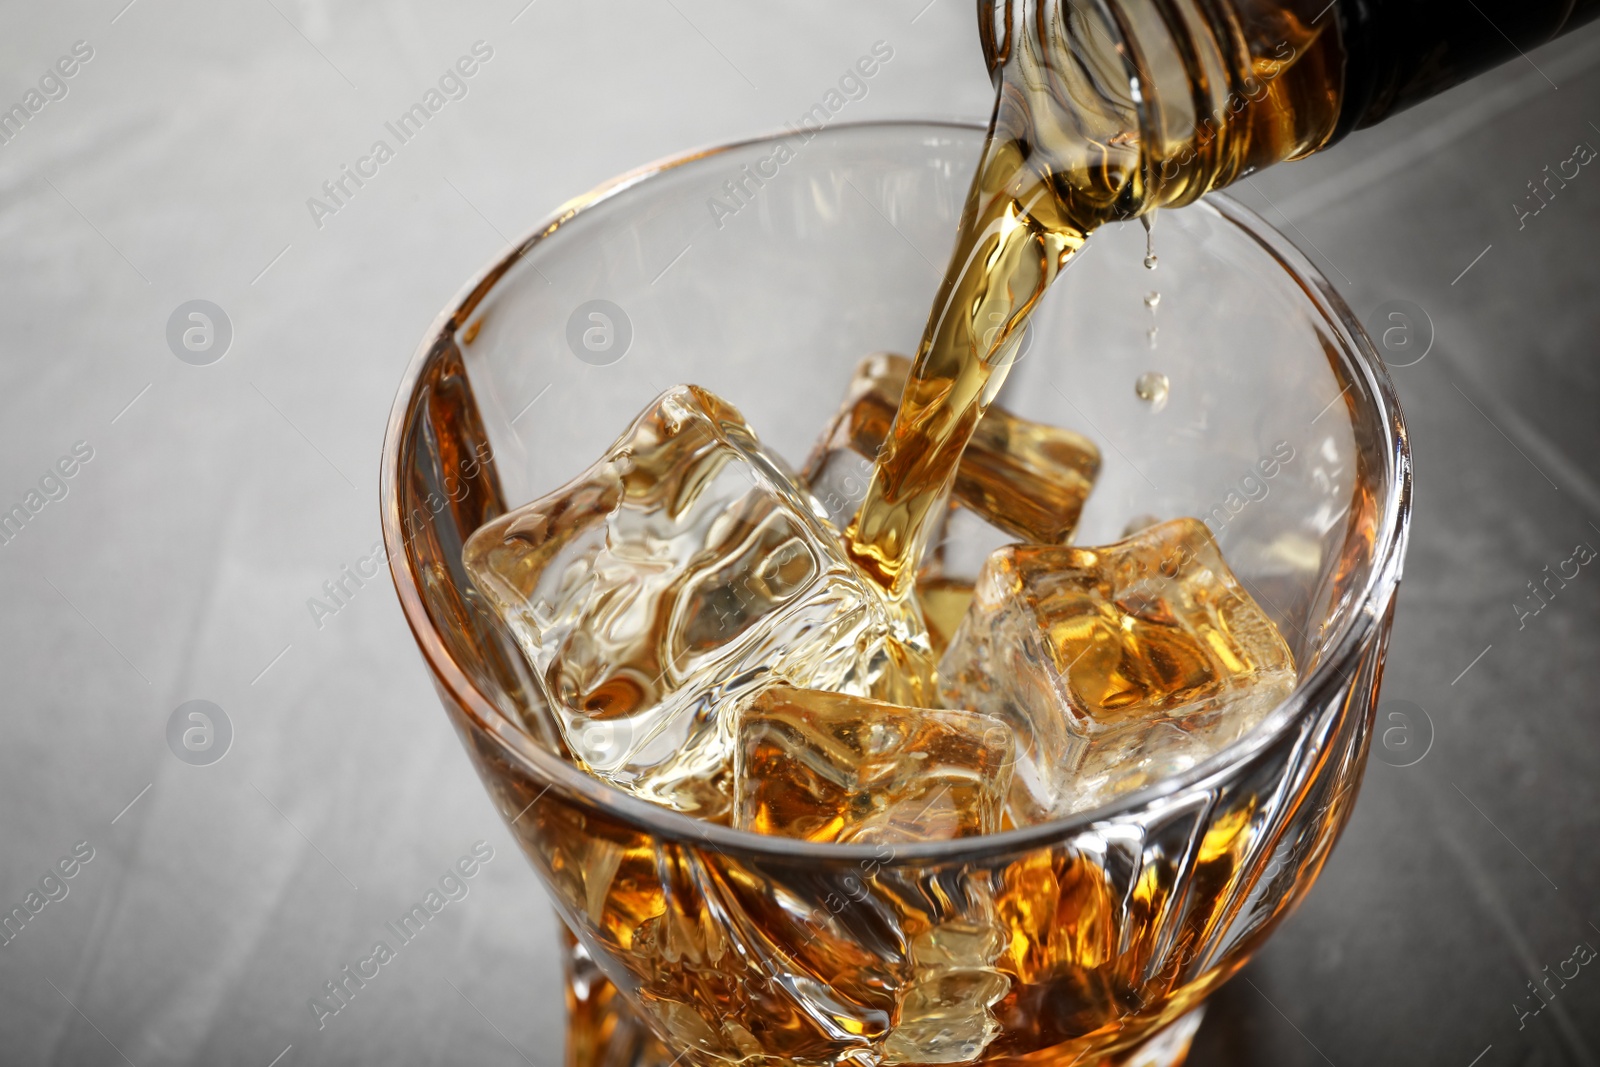 Photo of Pouring whiskey from bottle into glass with ice cubes on table, closeup